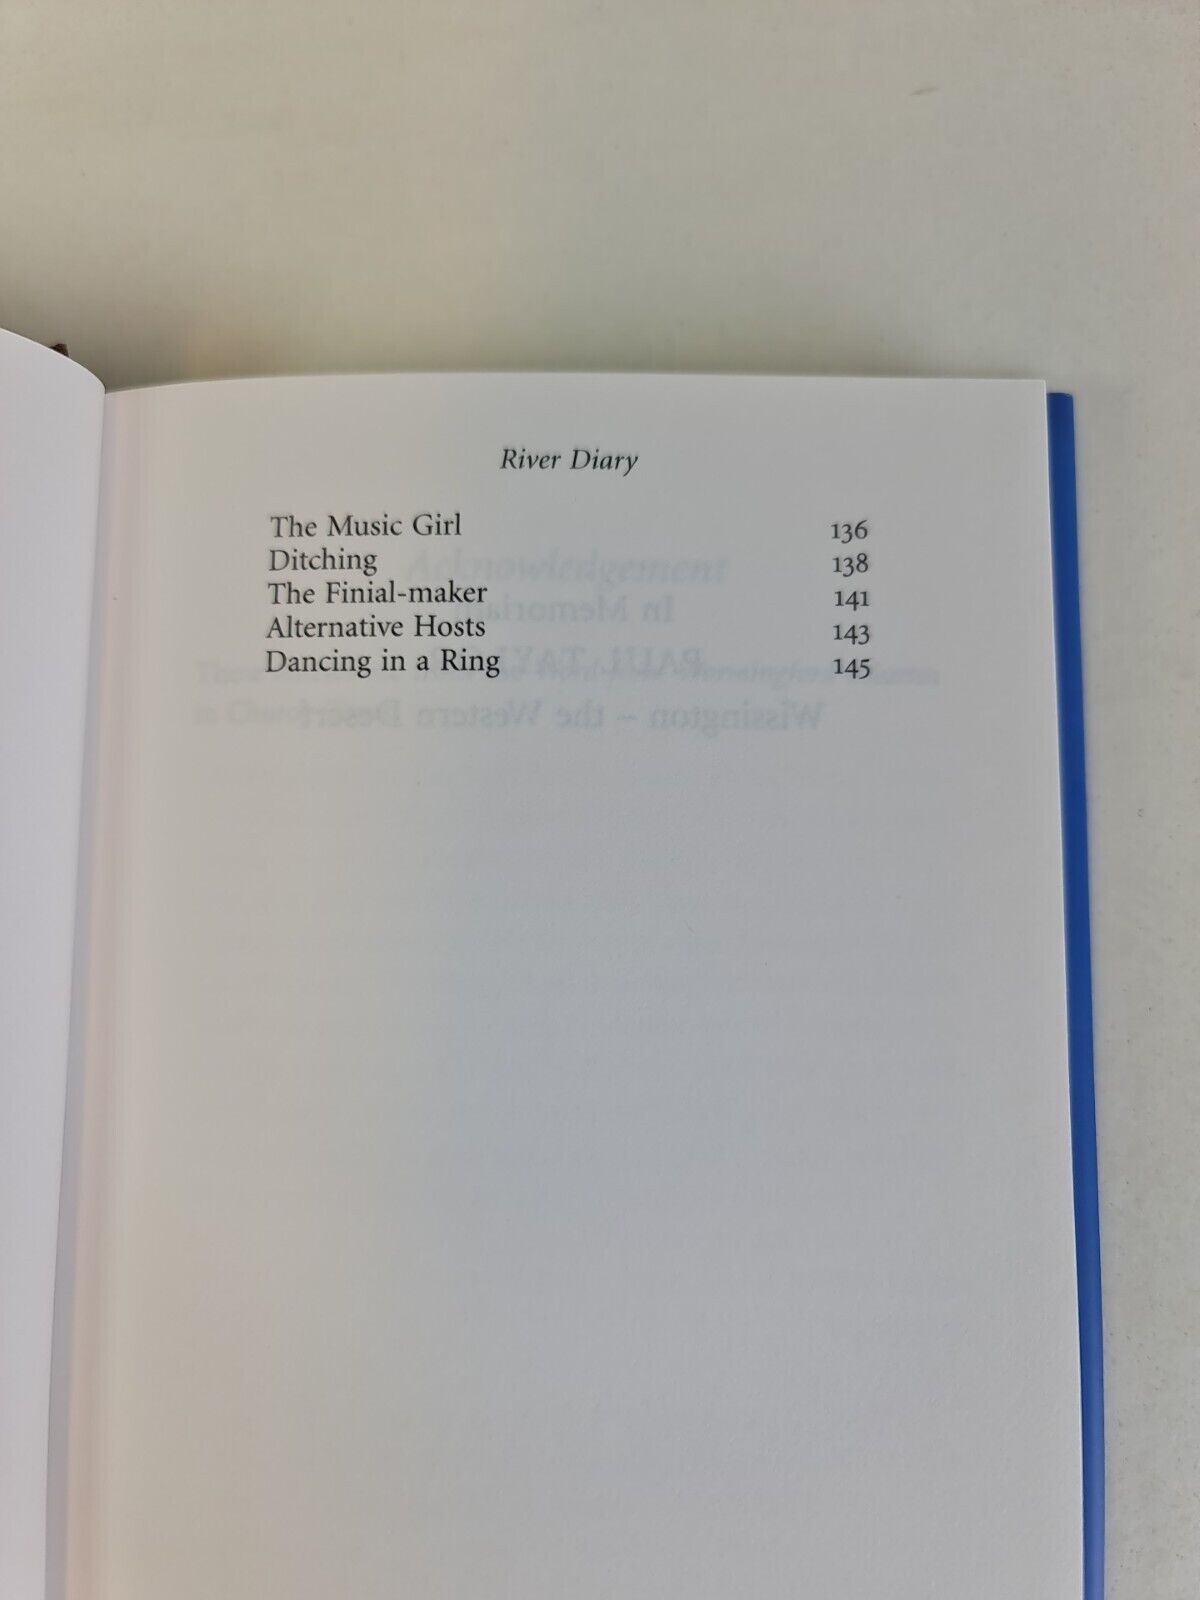 River Diary by Ronald Blythe (2008)